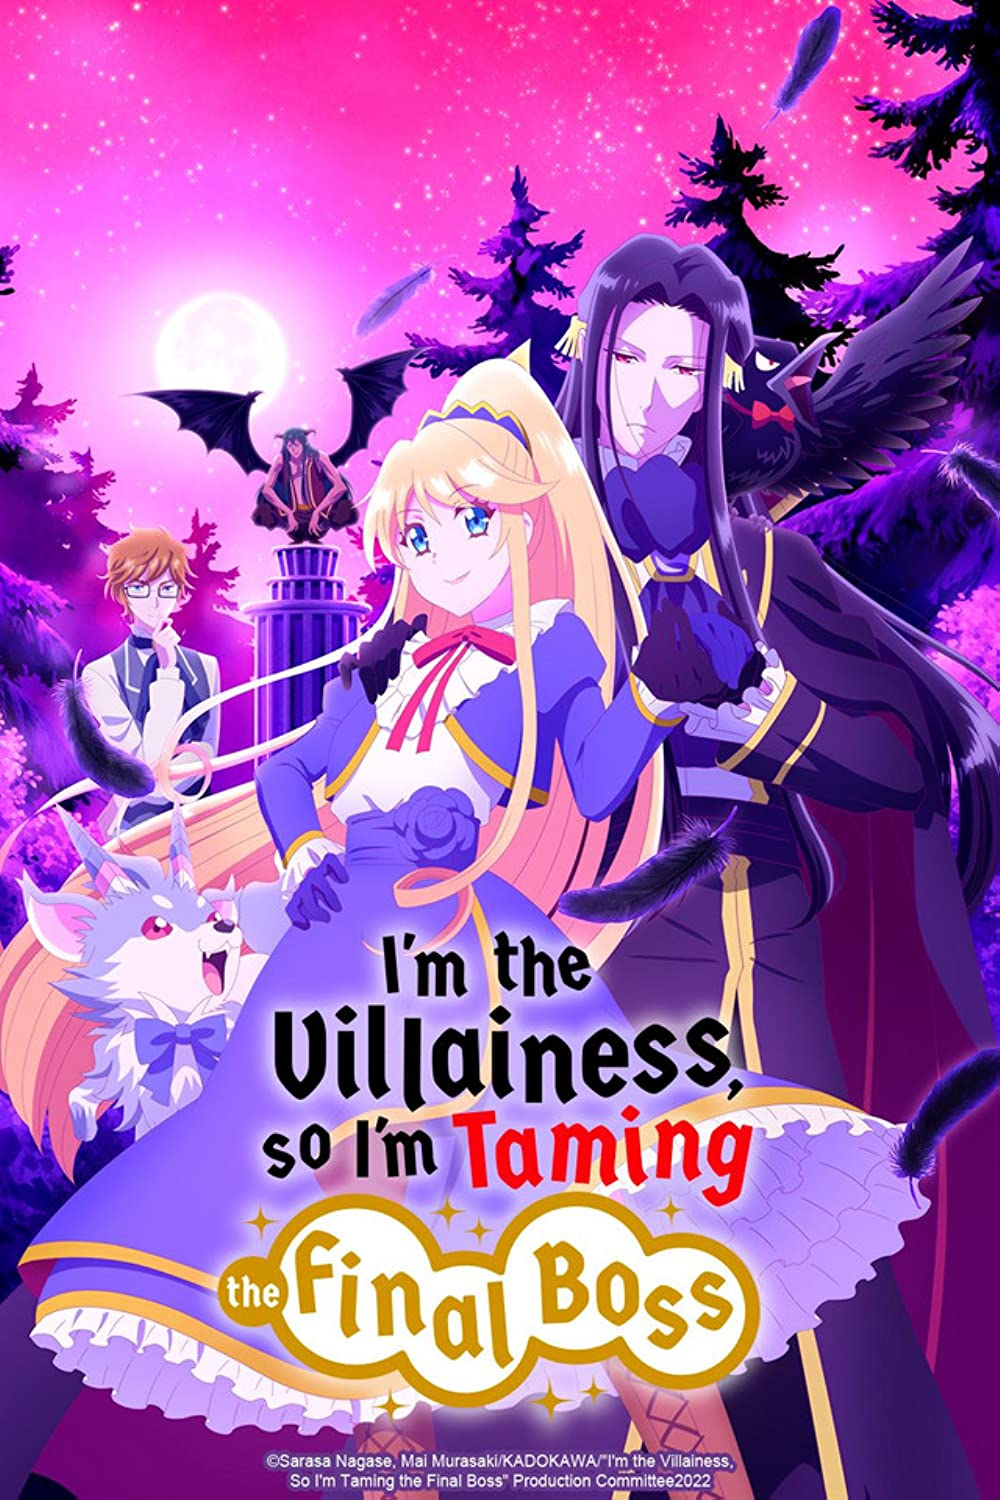 I'm the Villainess: Mid-Season Review - Anime Ignite